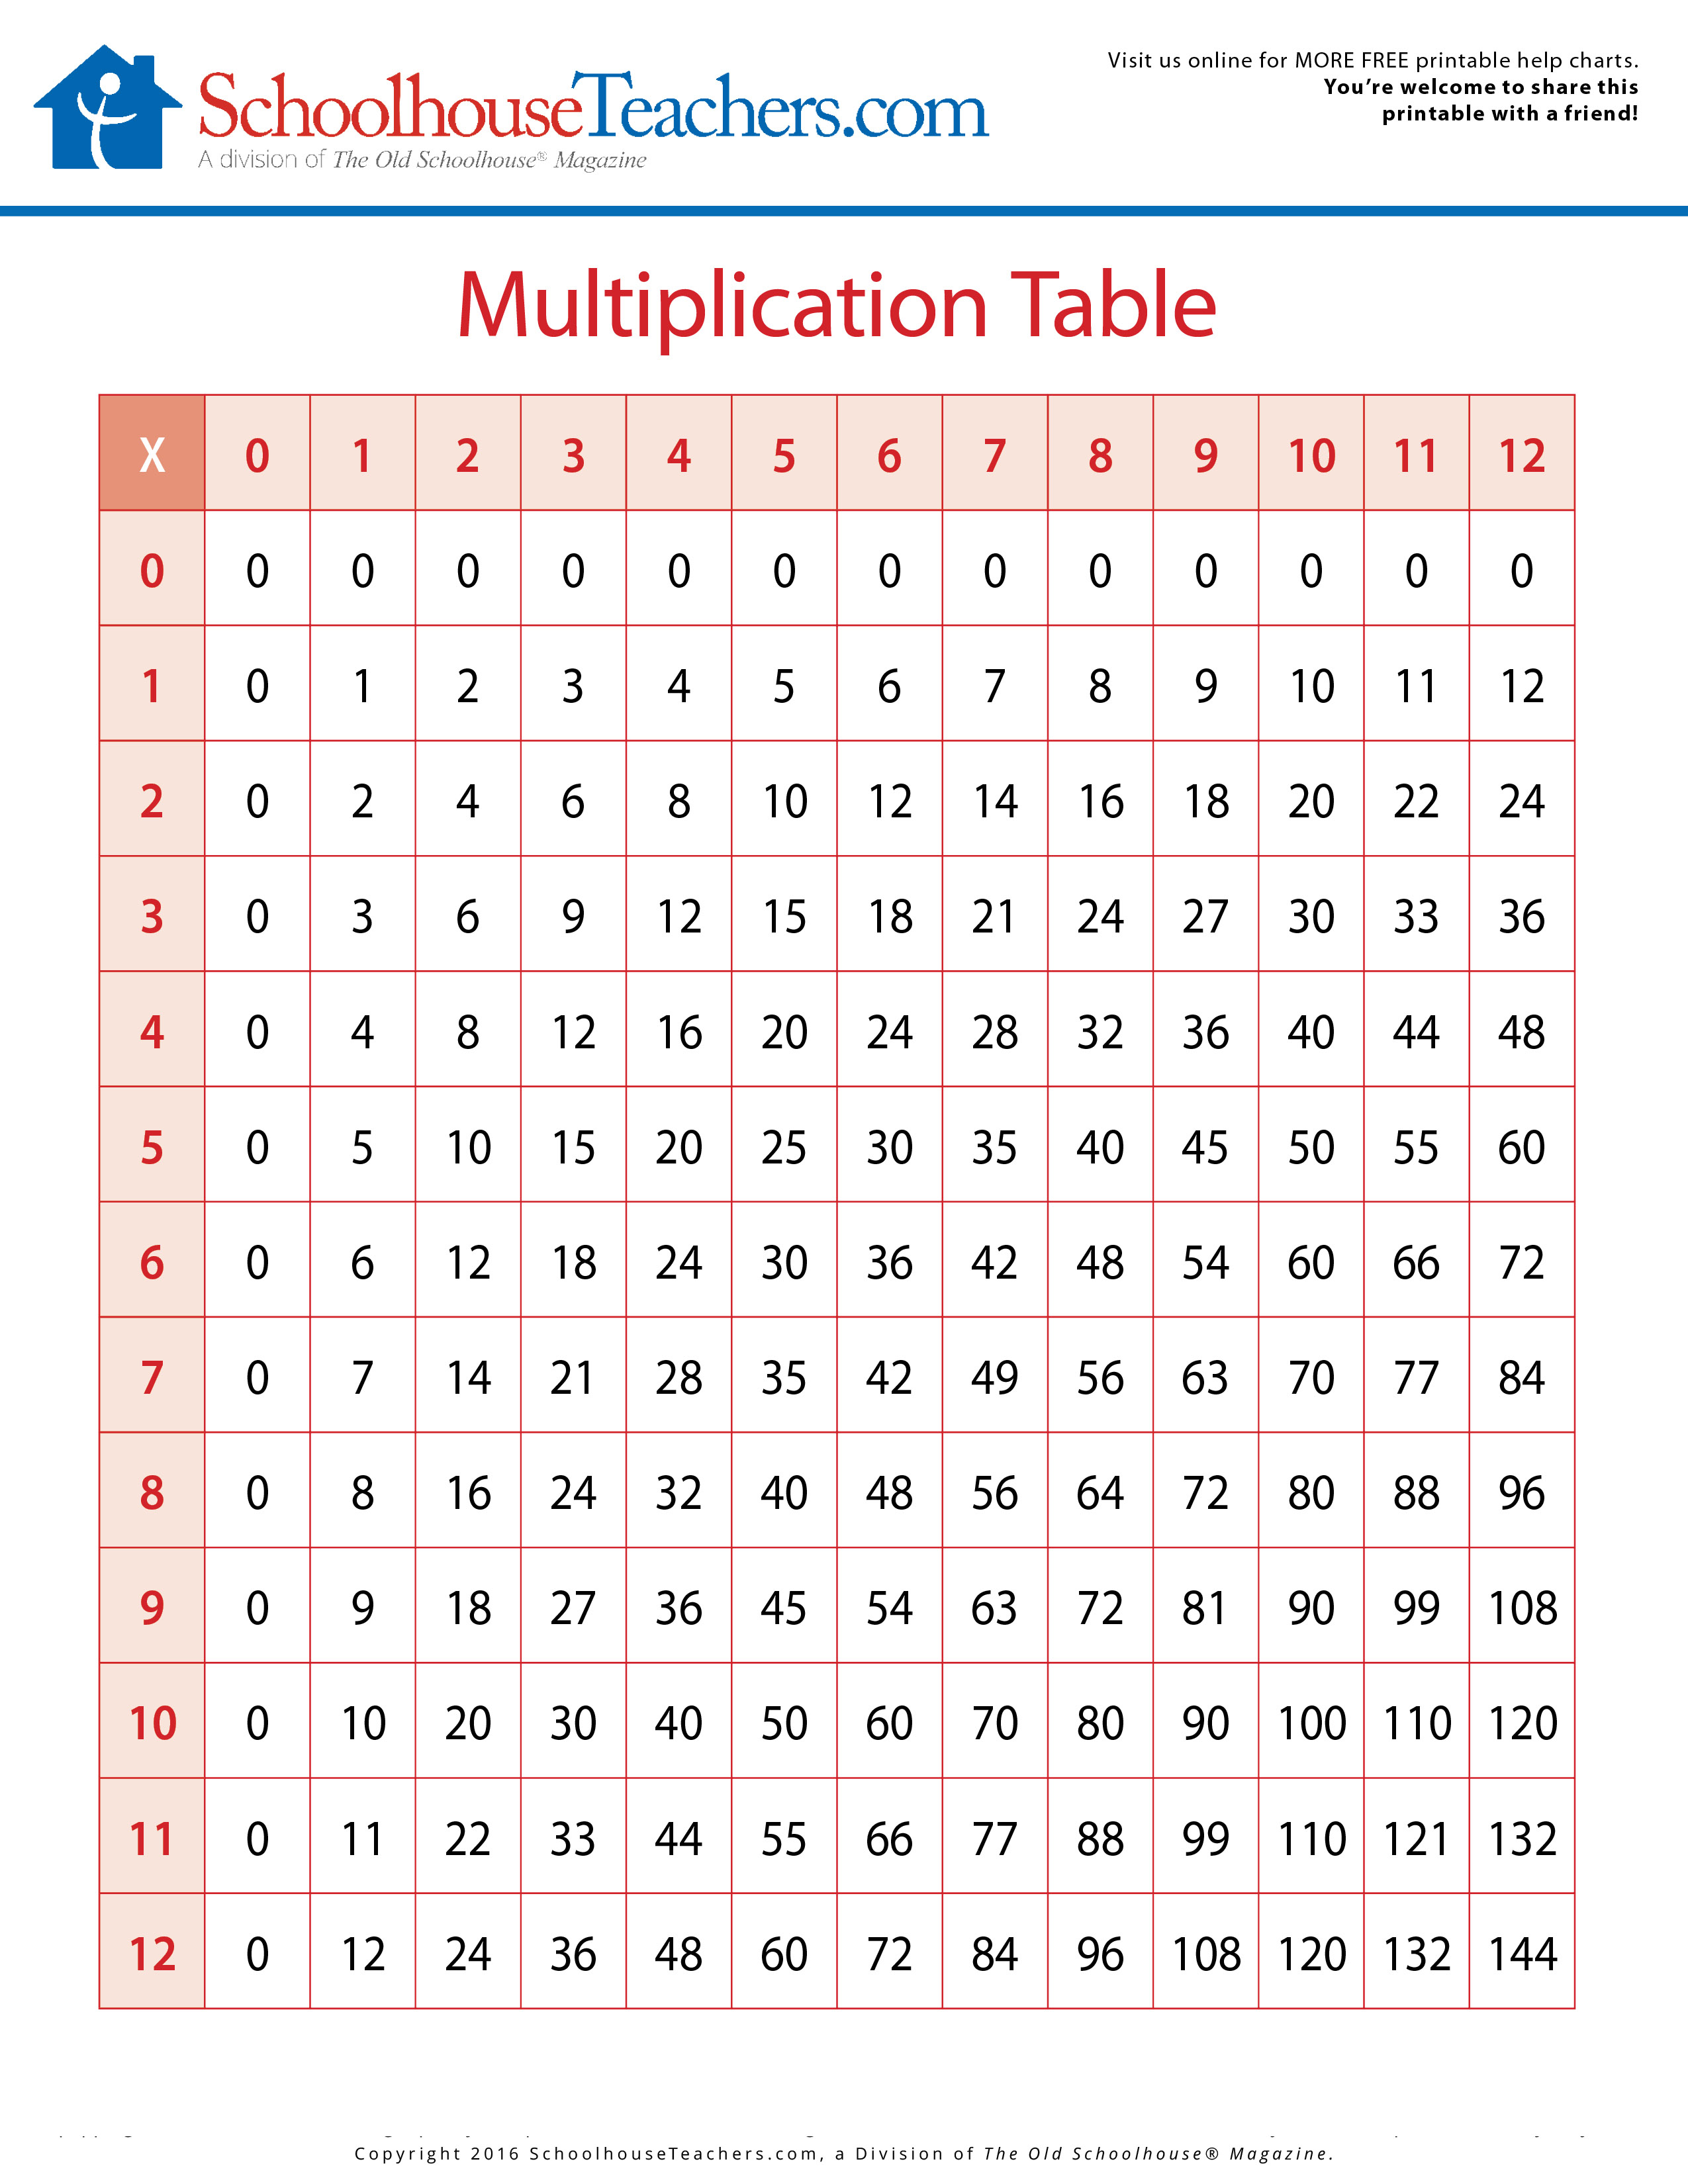 Is your child needing a little help learning their multiplication facts